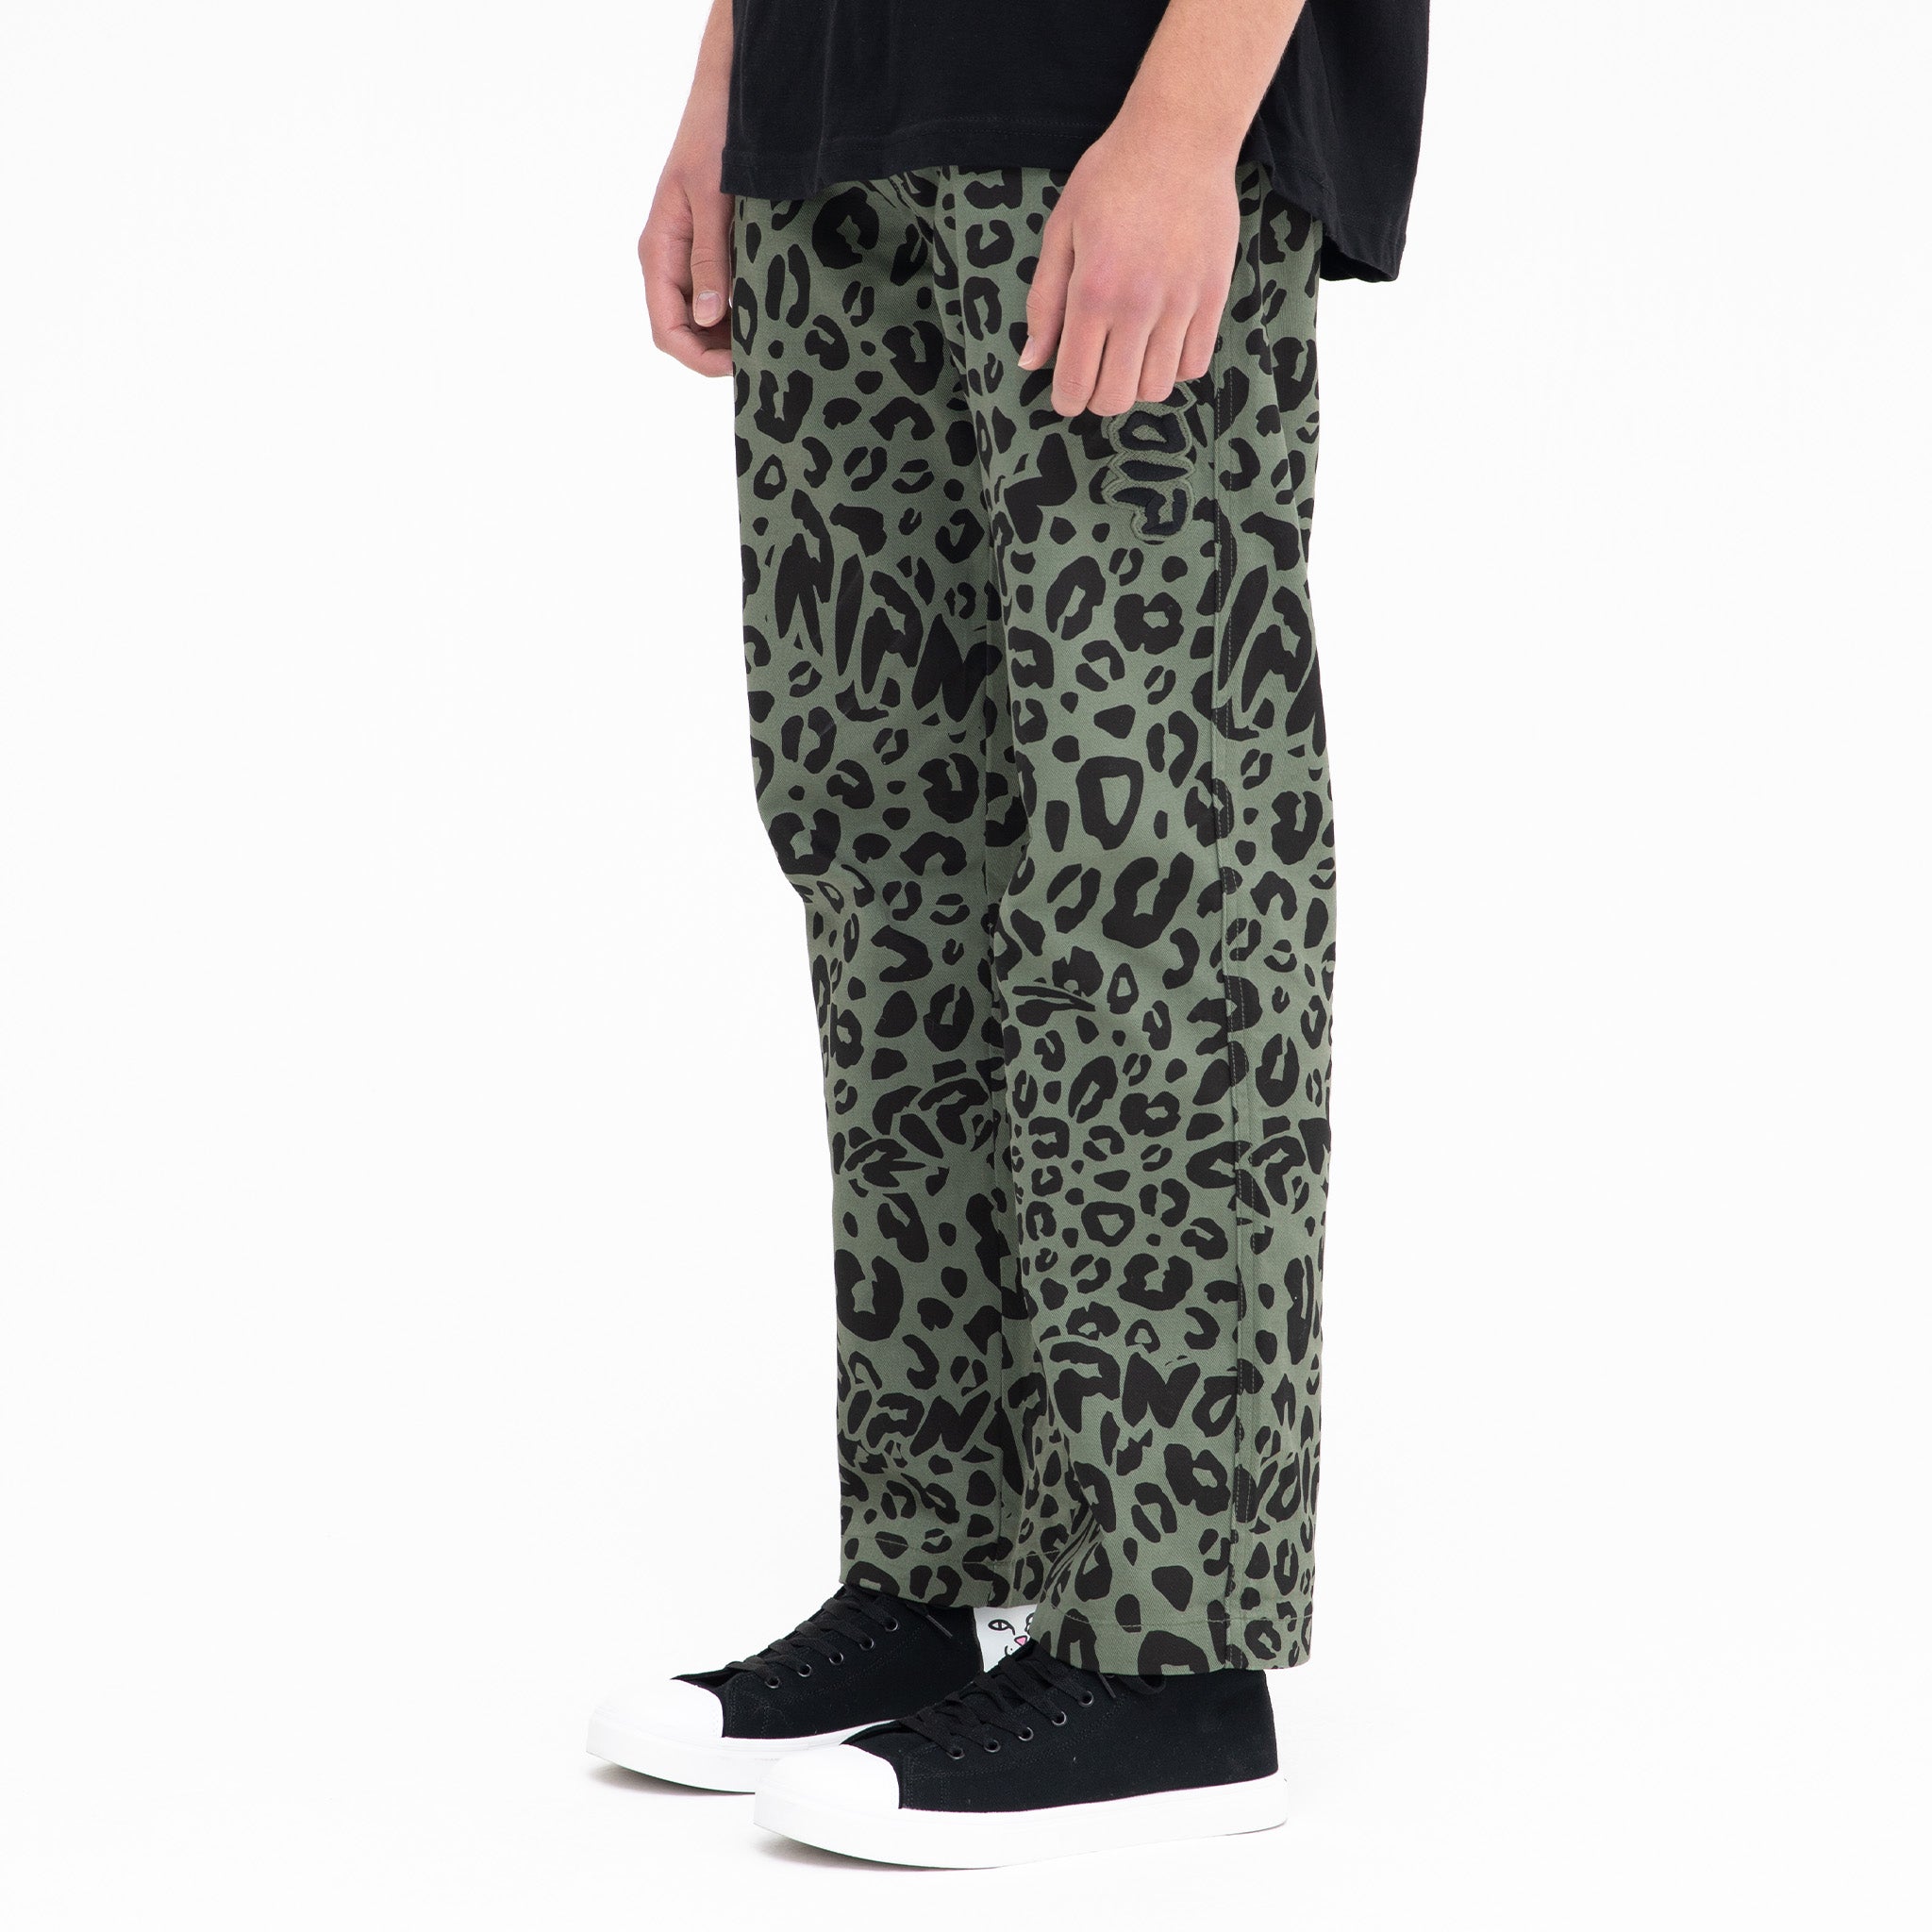 RIPNDIP Spotted Cotton Twill Pants (Olive)